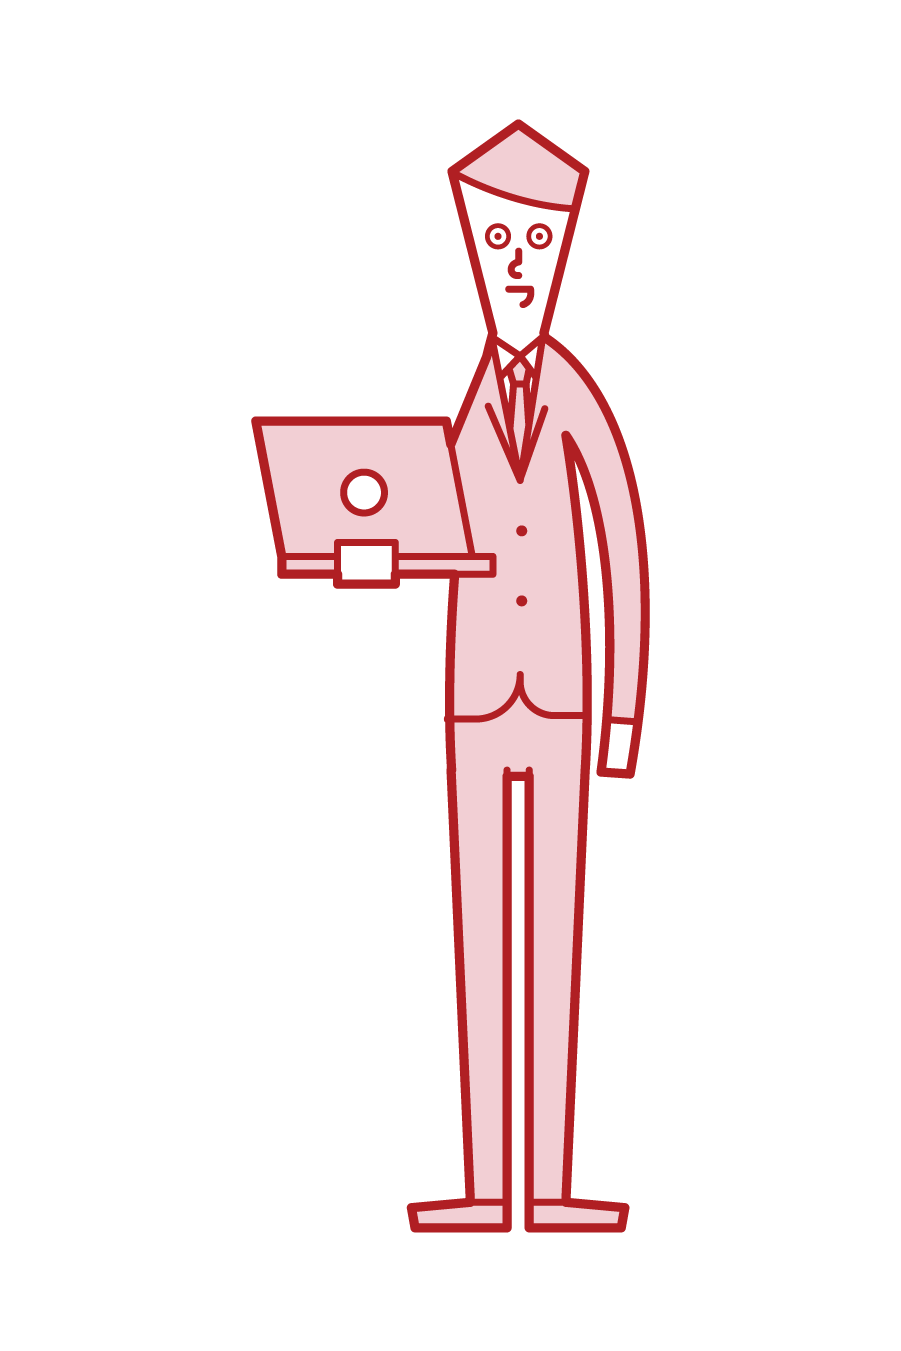 Illustration of a man with a personal computer